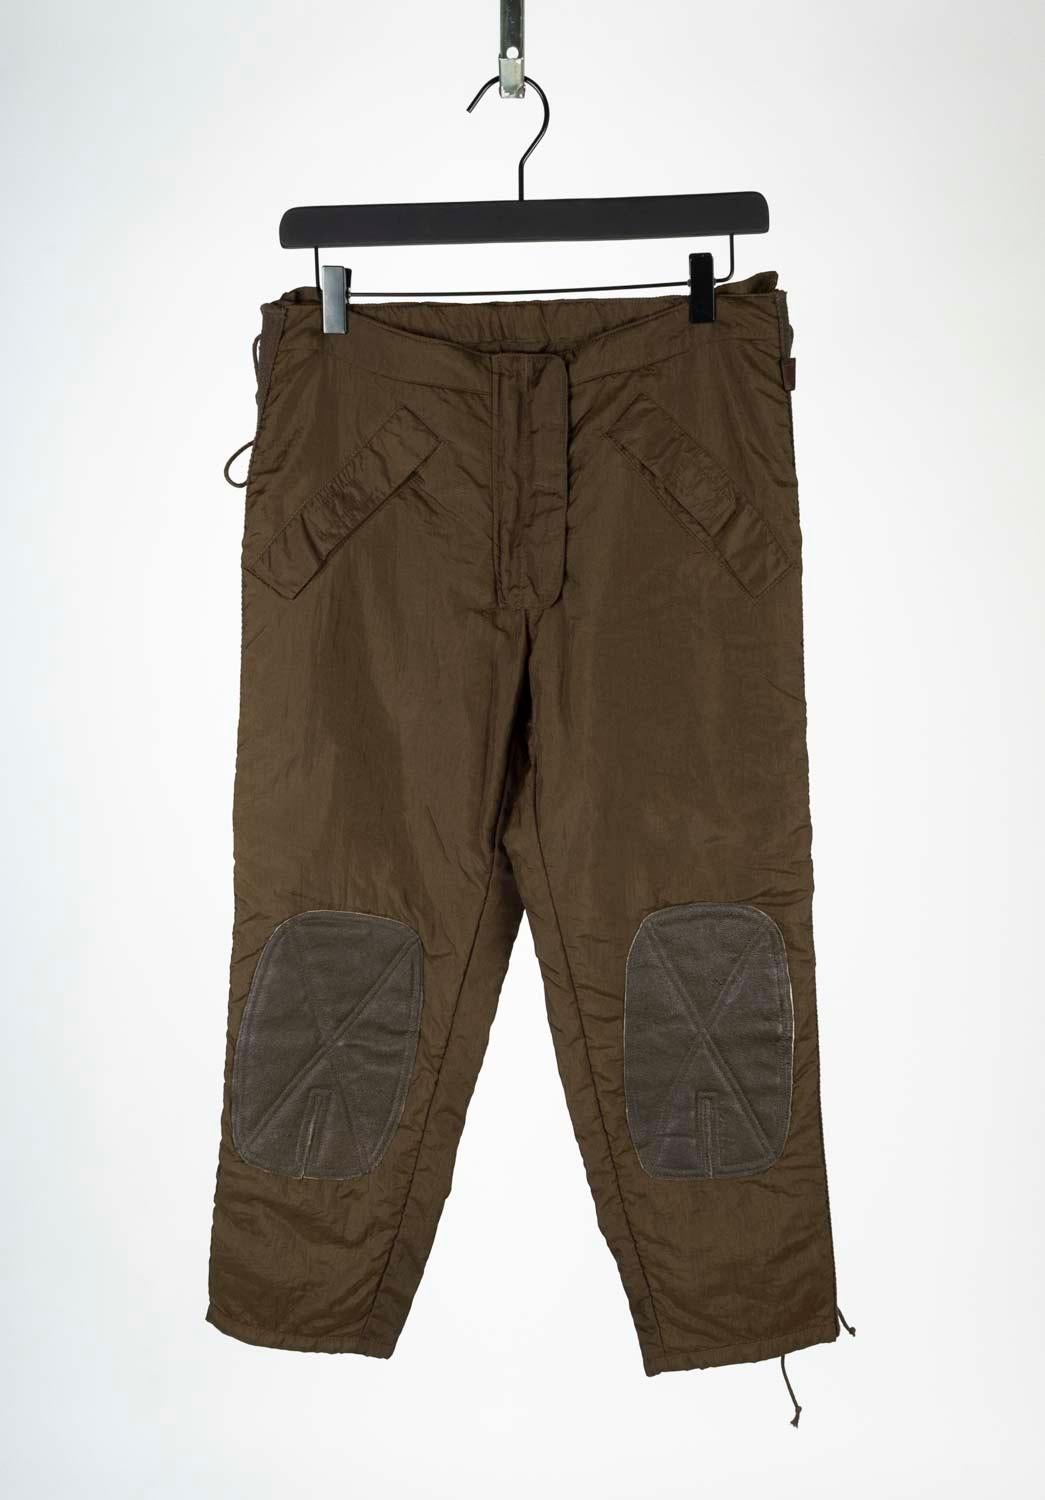 100% genuine Jean Paul Gaultier JPG Women Pants with leather app, ncode
Color: Brown
(An actual color may a bit vary due to individual computer screen interpretation)
Material: 100% polyamide
Tag size: 44 (Medium) Unisex.
These pants are great